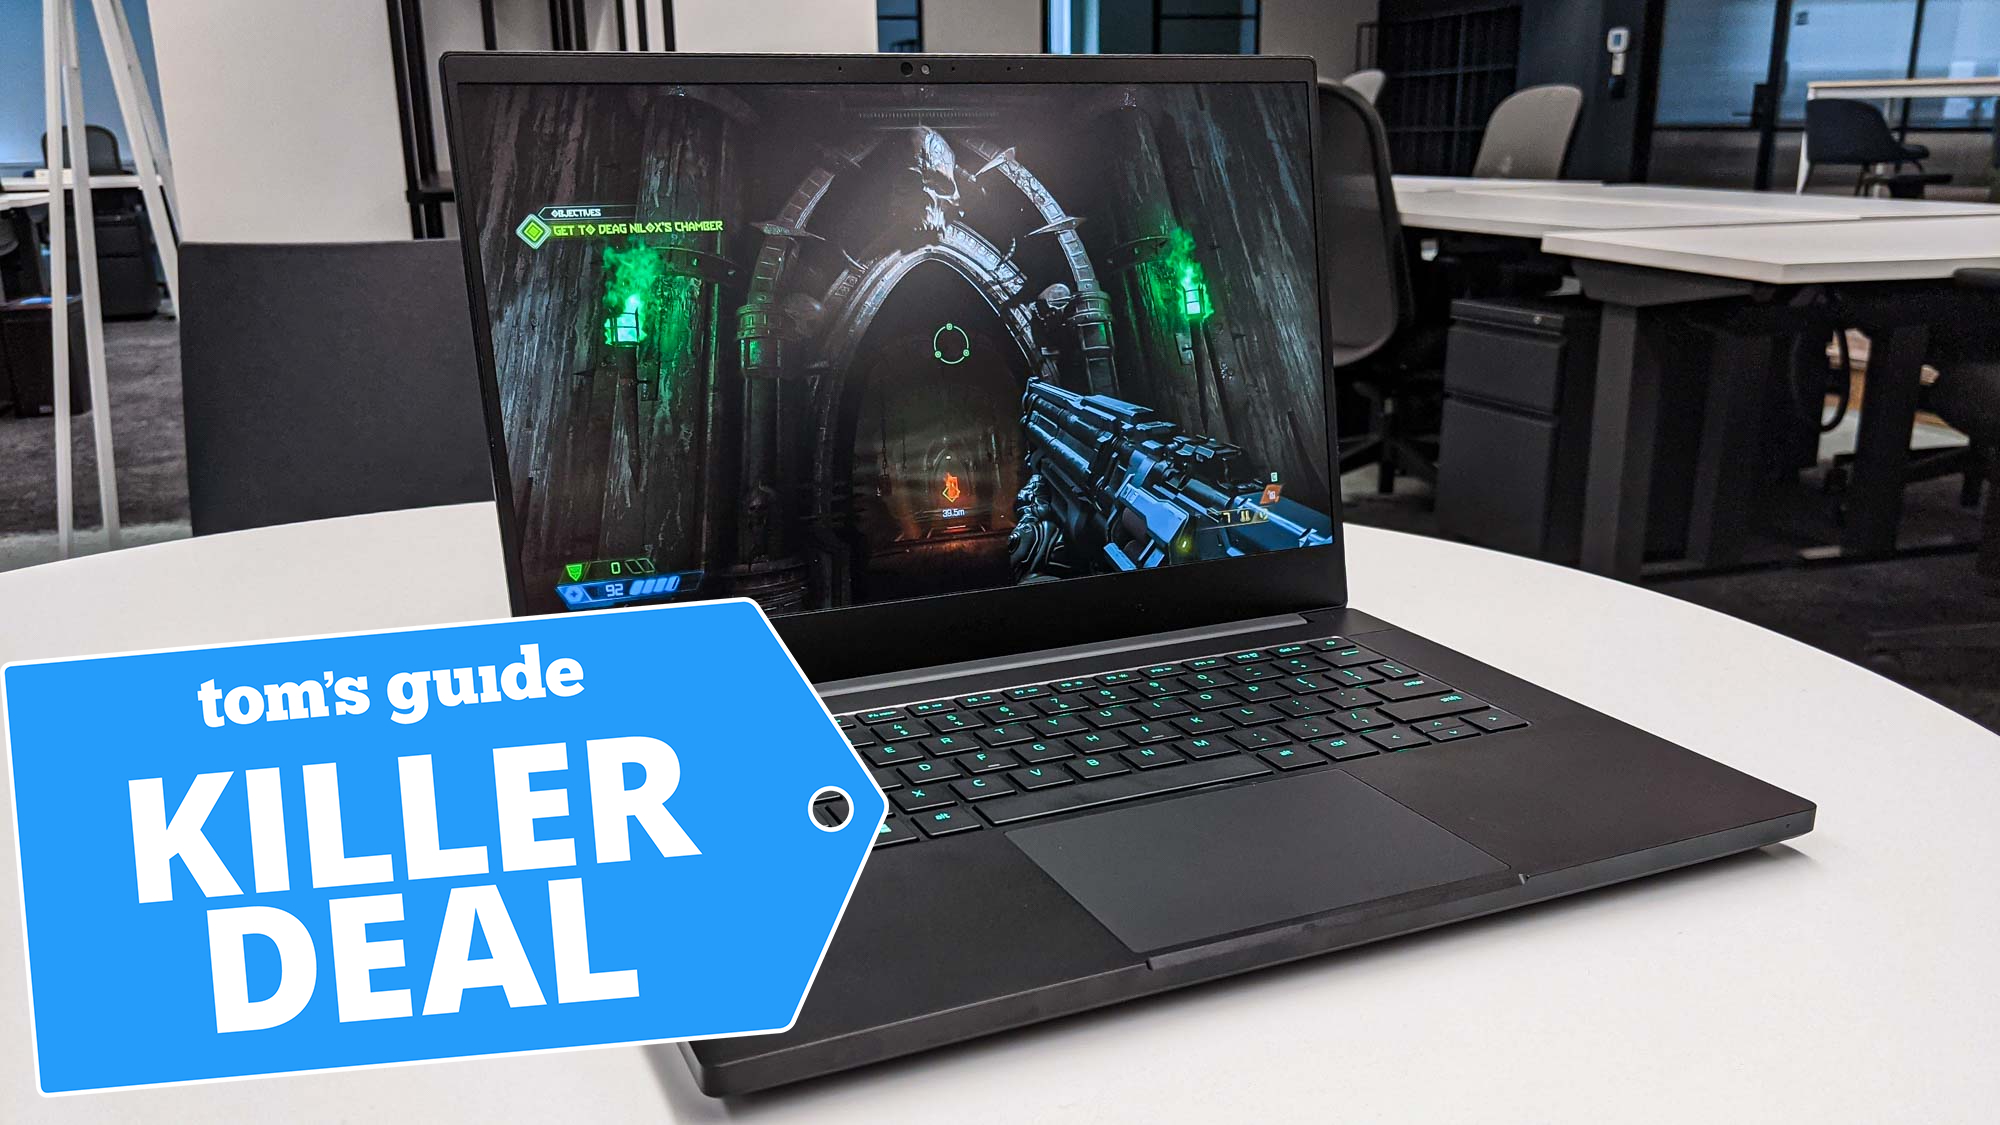 Razer Blade 14 with overlaid offer tag